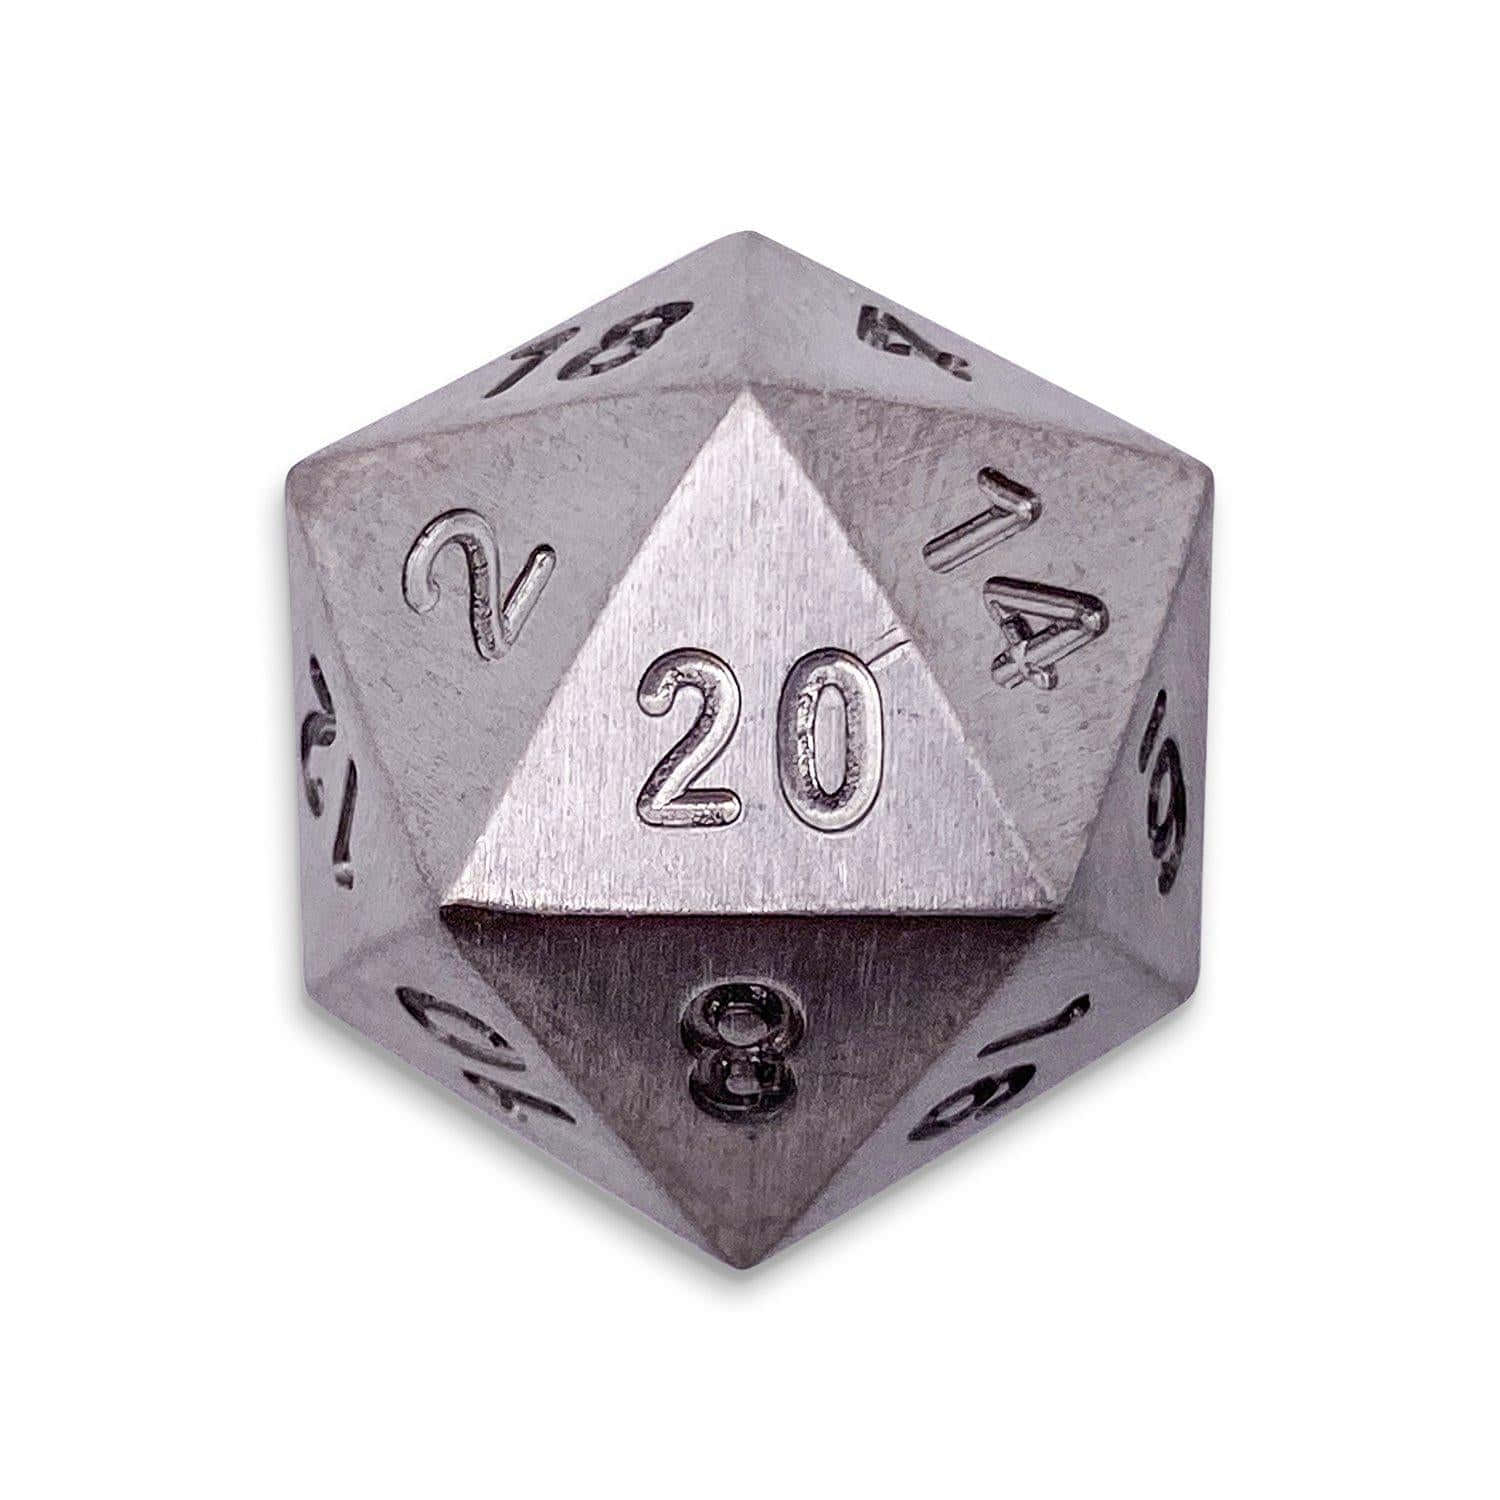 A Silver D20 Dice With Numbers On It